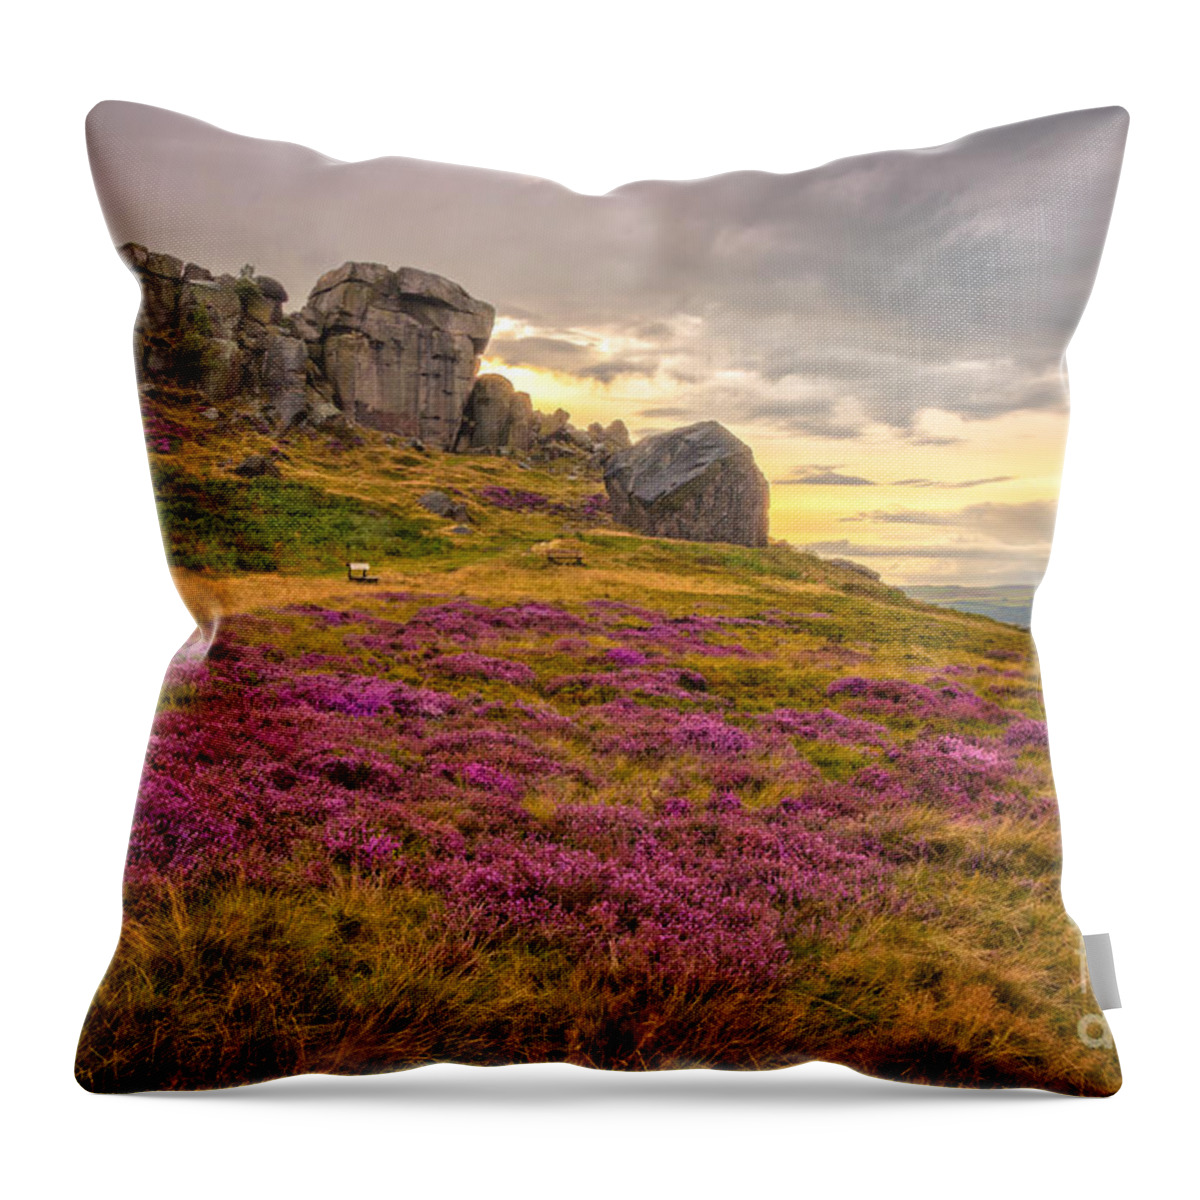 Airedale Throw Pillow featuring the photograph Sunset by Cow and Calf Rocks by Mariusz Talarek